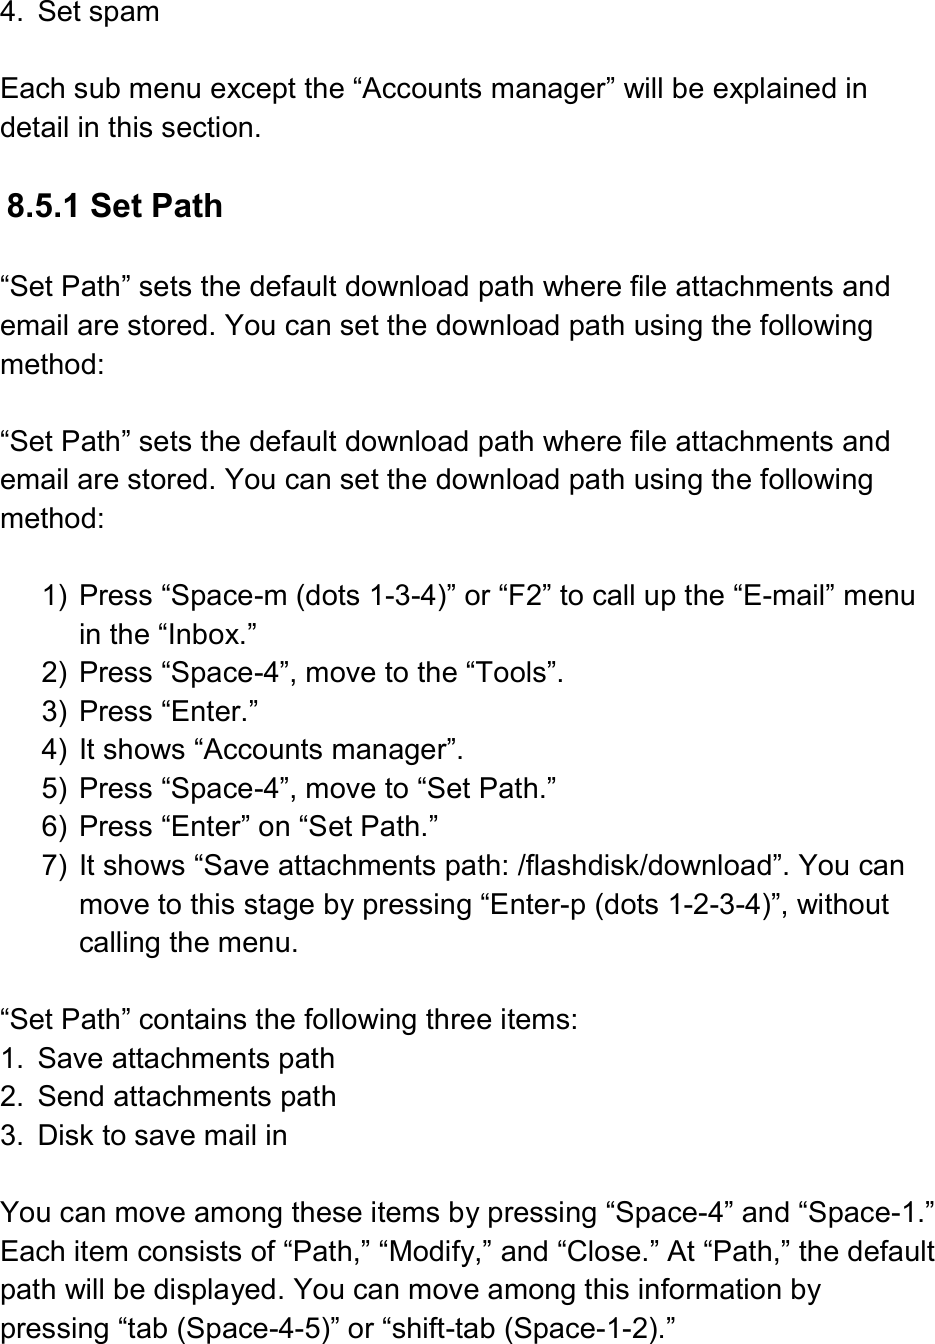  4.  Set spam  Each sub menu except the “Accounts manager” will be explained in detail in this section.  8.5.1 Set Path  “Set Path” sets the default download path where file attachments and email are stored. You can set the download path using the following method:  “Set Path” sets the default download path where file attachments and email are stored. You can set the download path using the following method:  1)  Press “Space-m (dots 1-3-4)” or “F2” to call up the “E-mail” menu in the “Inbox.” 2)  Press “Space-4”, move to the “Tools”. 3)  Press “Enter.”   4)  It shows “Accounts manager”. 5)  Press “Space-4”, move to “Set Path.” 6)  Press “Enter” on “Set Path.”   7)  It shows “Save attachments path: /flashdisk/download”. You can move to this stage by pressing “Enter-p (dots 1-2-3-4)”, without calling the menu.  “Set Path” contains the following three items: 1.  Save attachments path 2.  Send attachments path 3.  Disk to save mail in  You can move among these items by pressing “Space-4” and “Space-1.” Each item consists of “Path,” “Modify,” and “Close.” At “Path,” the default path will be displayed. You can move among this information by pressing “tab (Space-4-5)” or “shift-tab (Space-1-2).”  